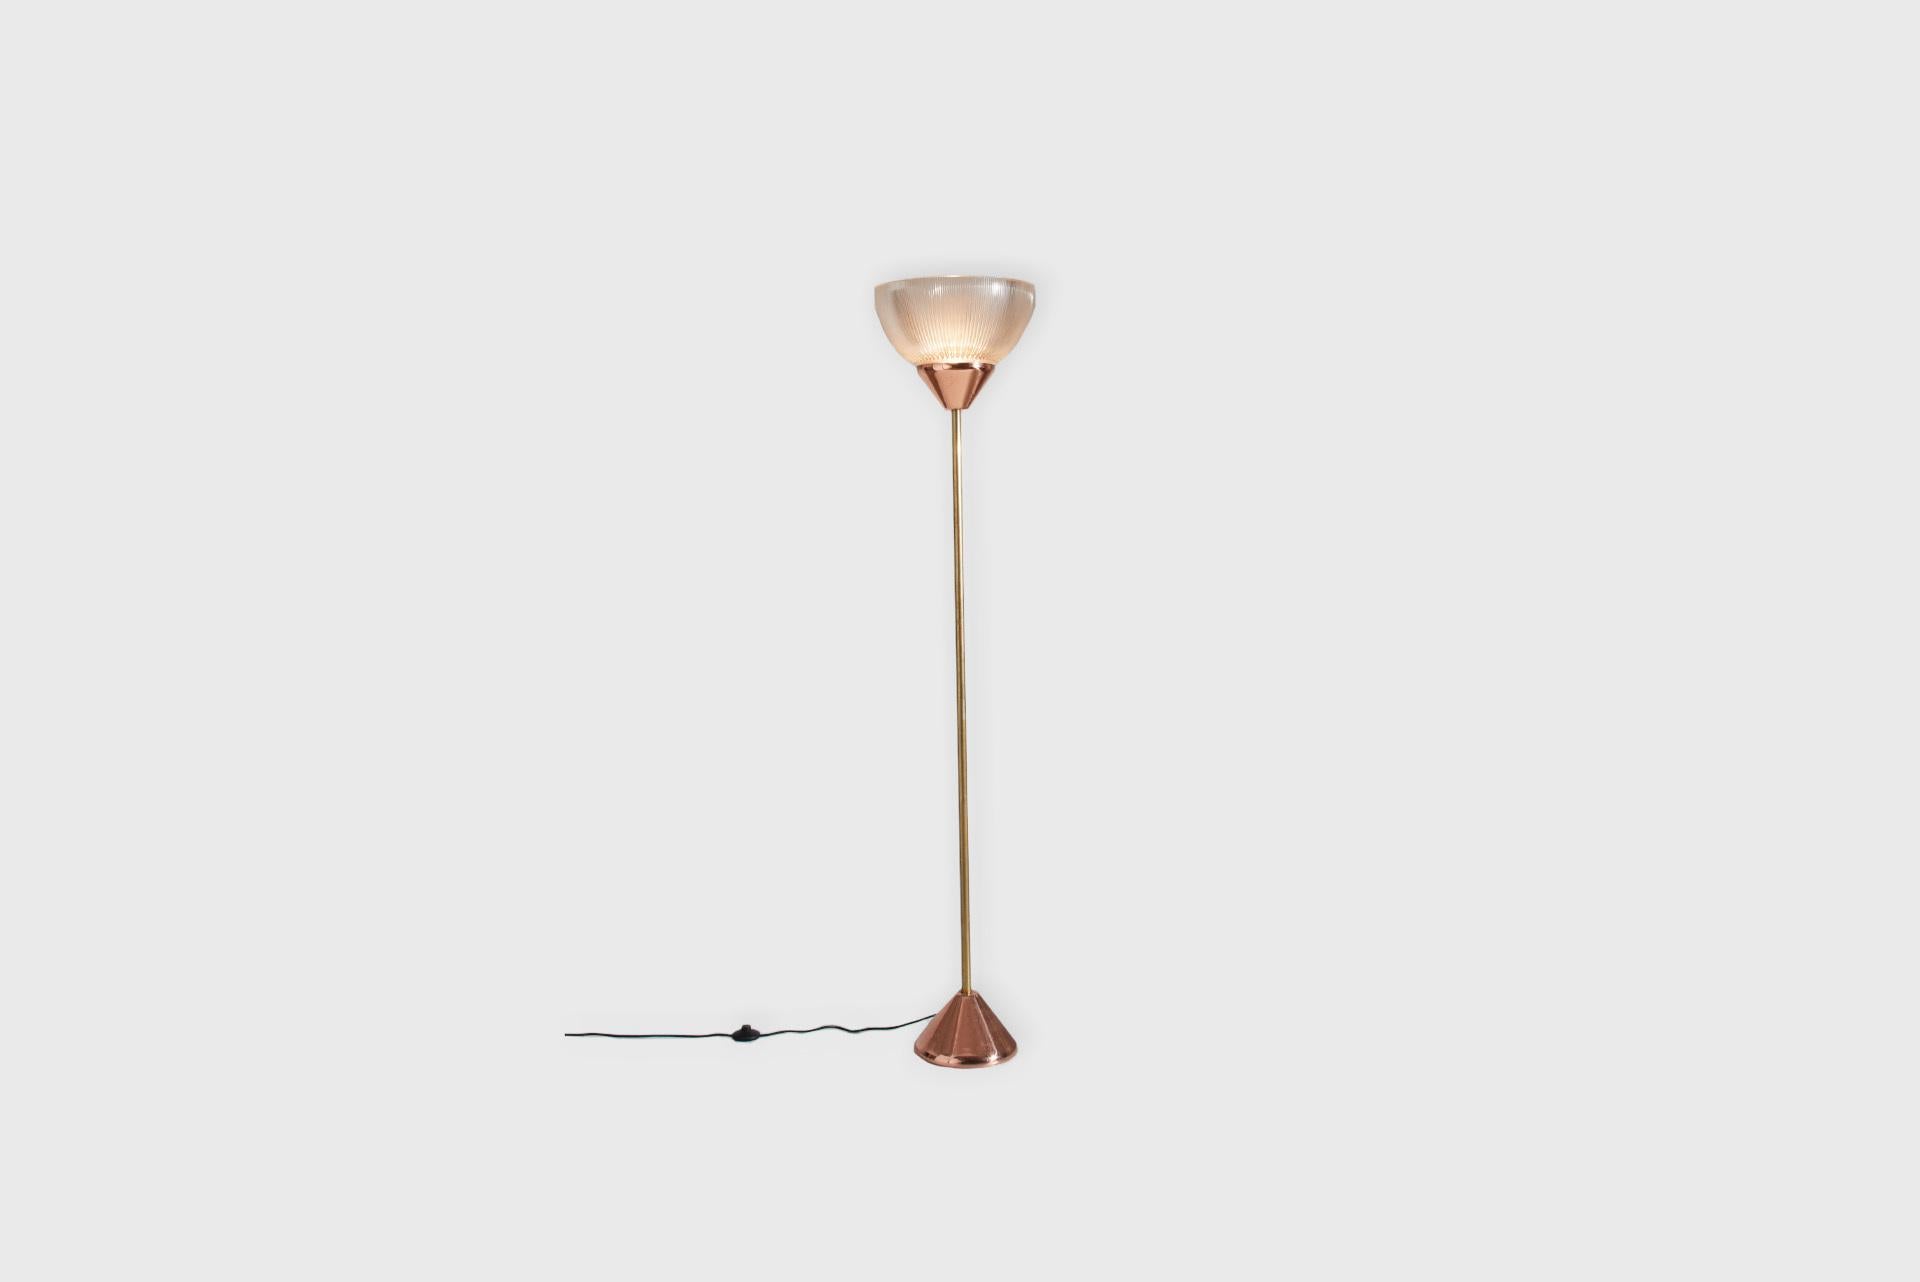 Luigi Caccia Dominioni (1913-2016)

Floor lamp
Manufactured by Azucena,
Italy, 1980.
Cast iron, copper-plated metal, brass, pressed glass

Measurements
40cmx185hcm 101,6 
in x 469,9 h in
